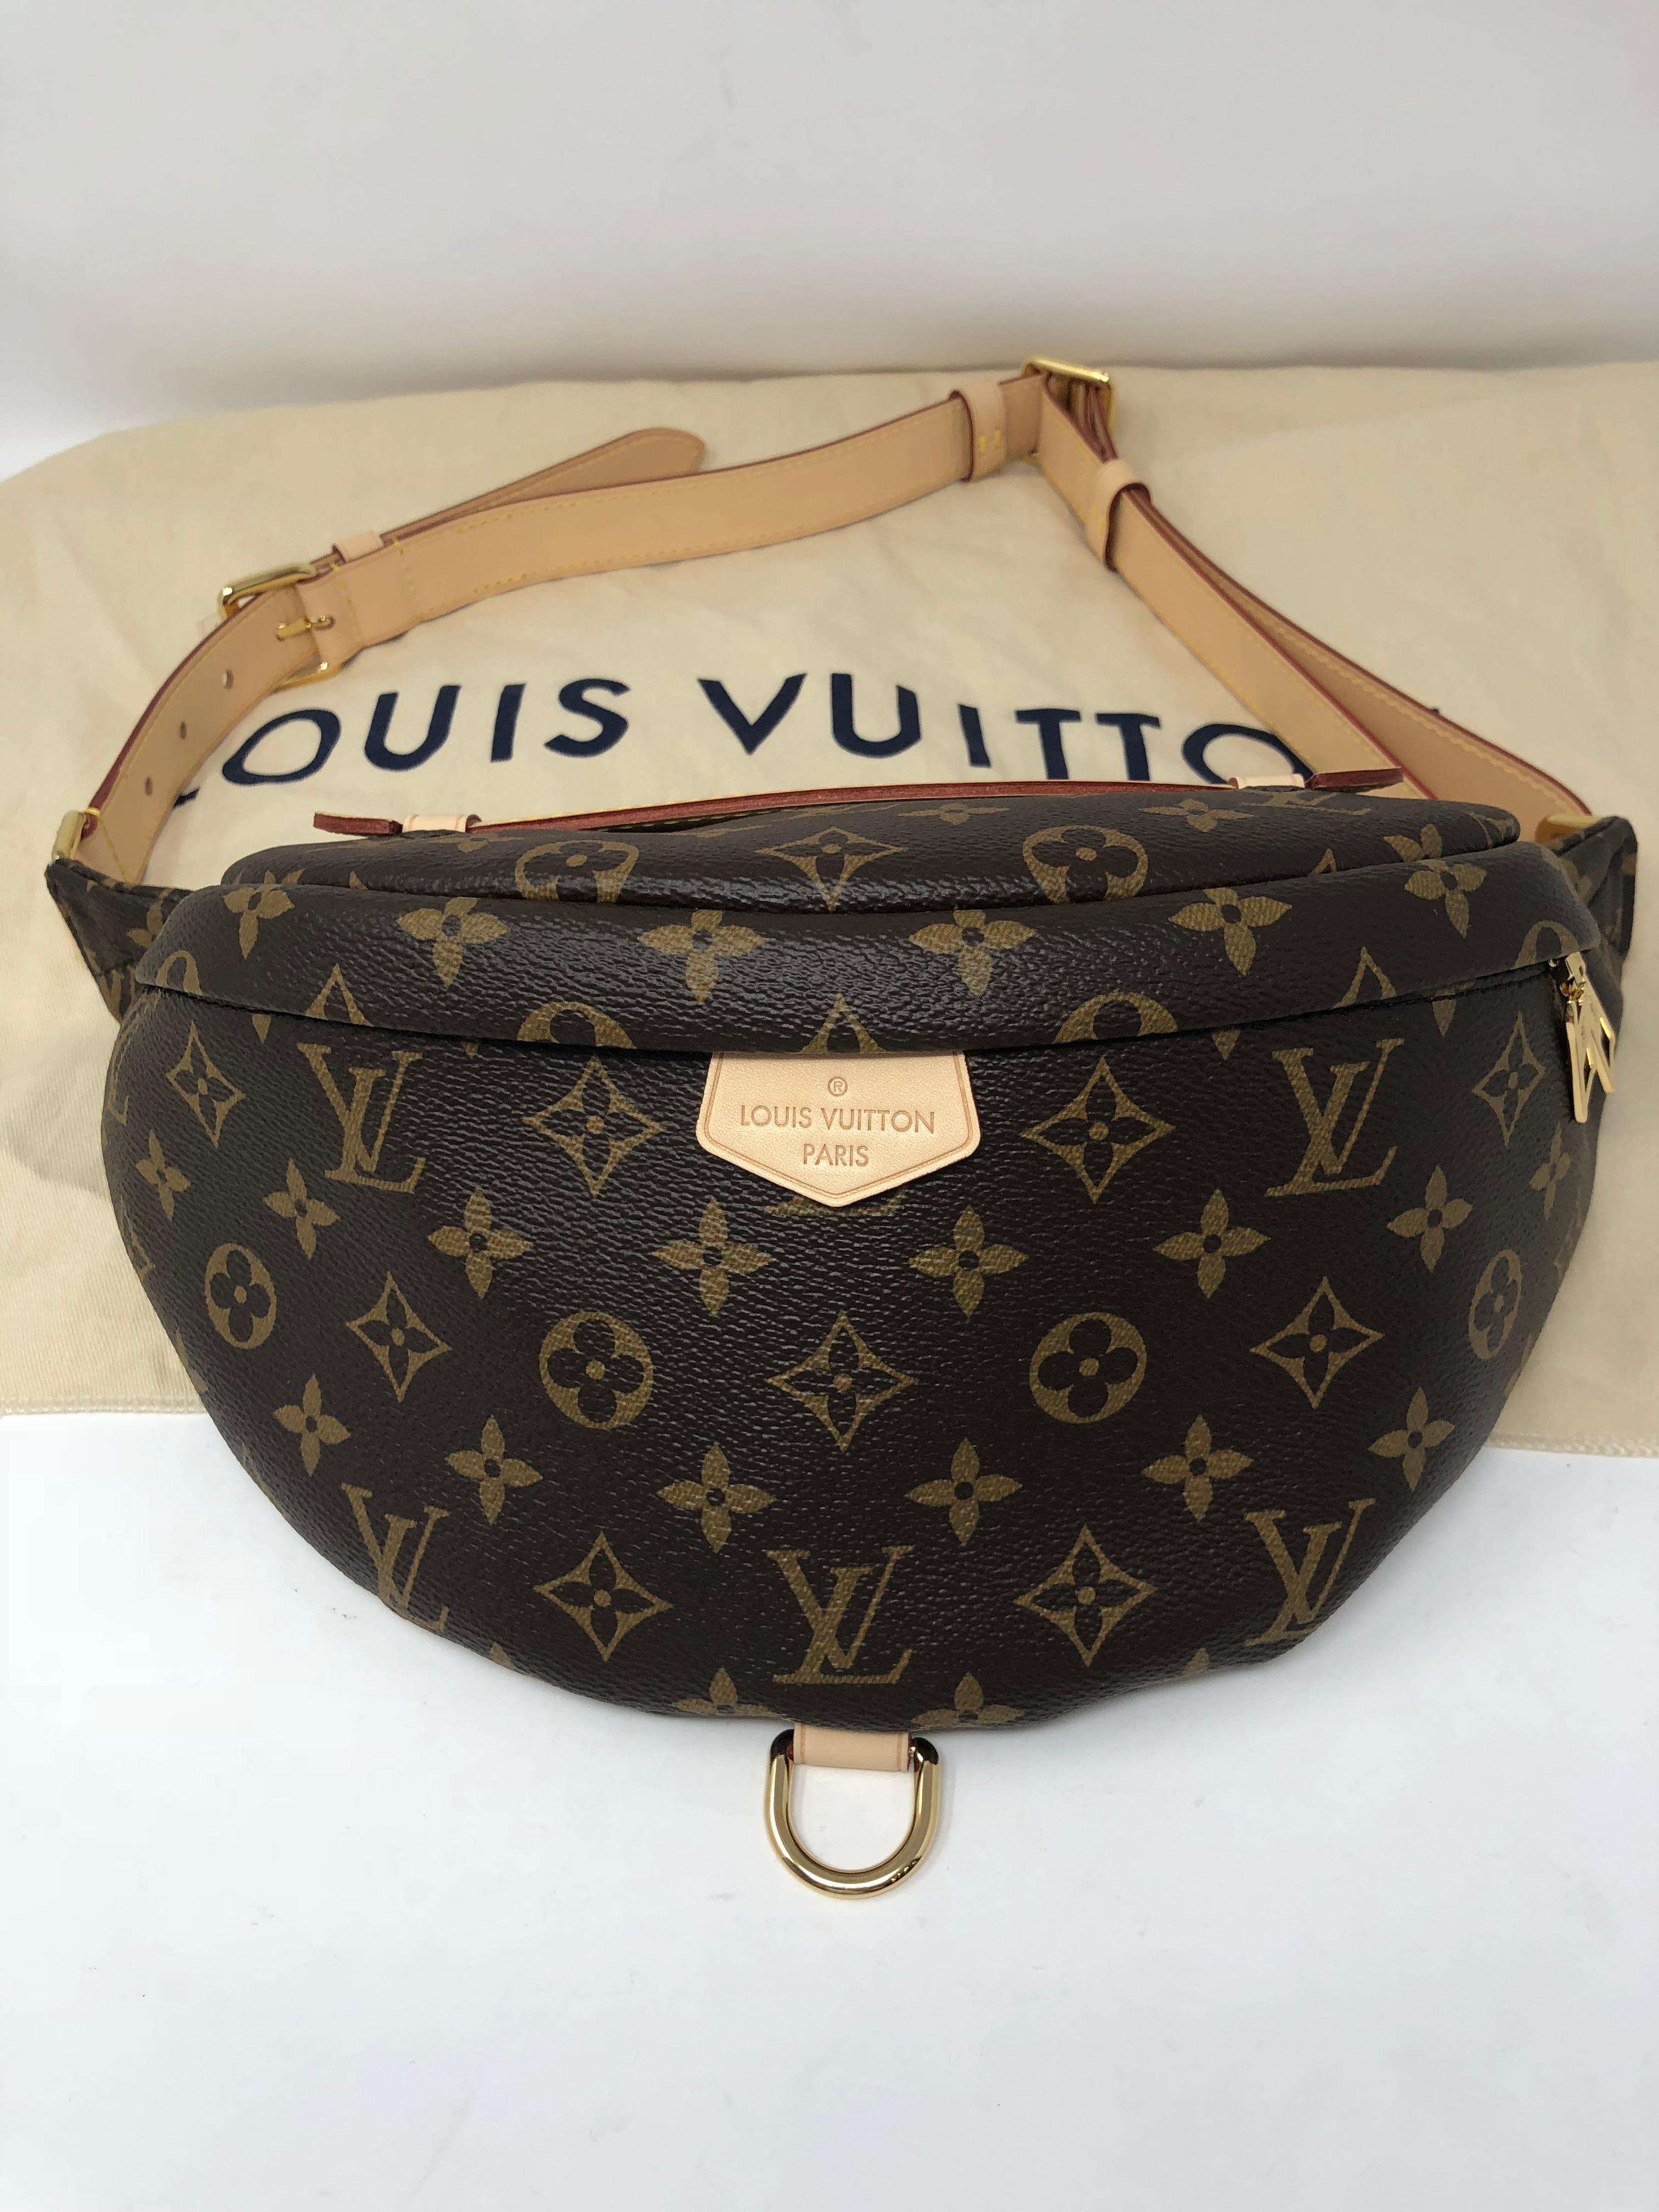 Louis Vuitton Bum Bag/ Fanny Pack. Brand new and sold out. Monogram makes this a classic always. Can be worn around waist, hips, and as a sling bag across body. Celebrity owned and never used. Comes with dust cover, care booklet, and box. Guaranteed